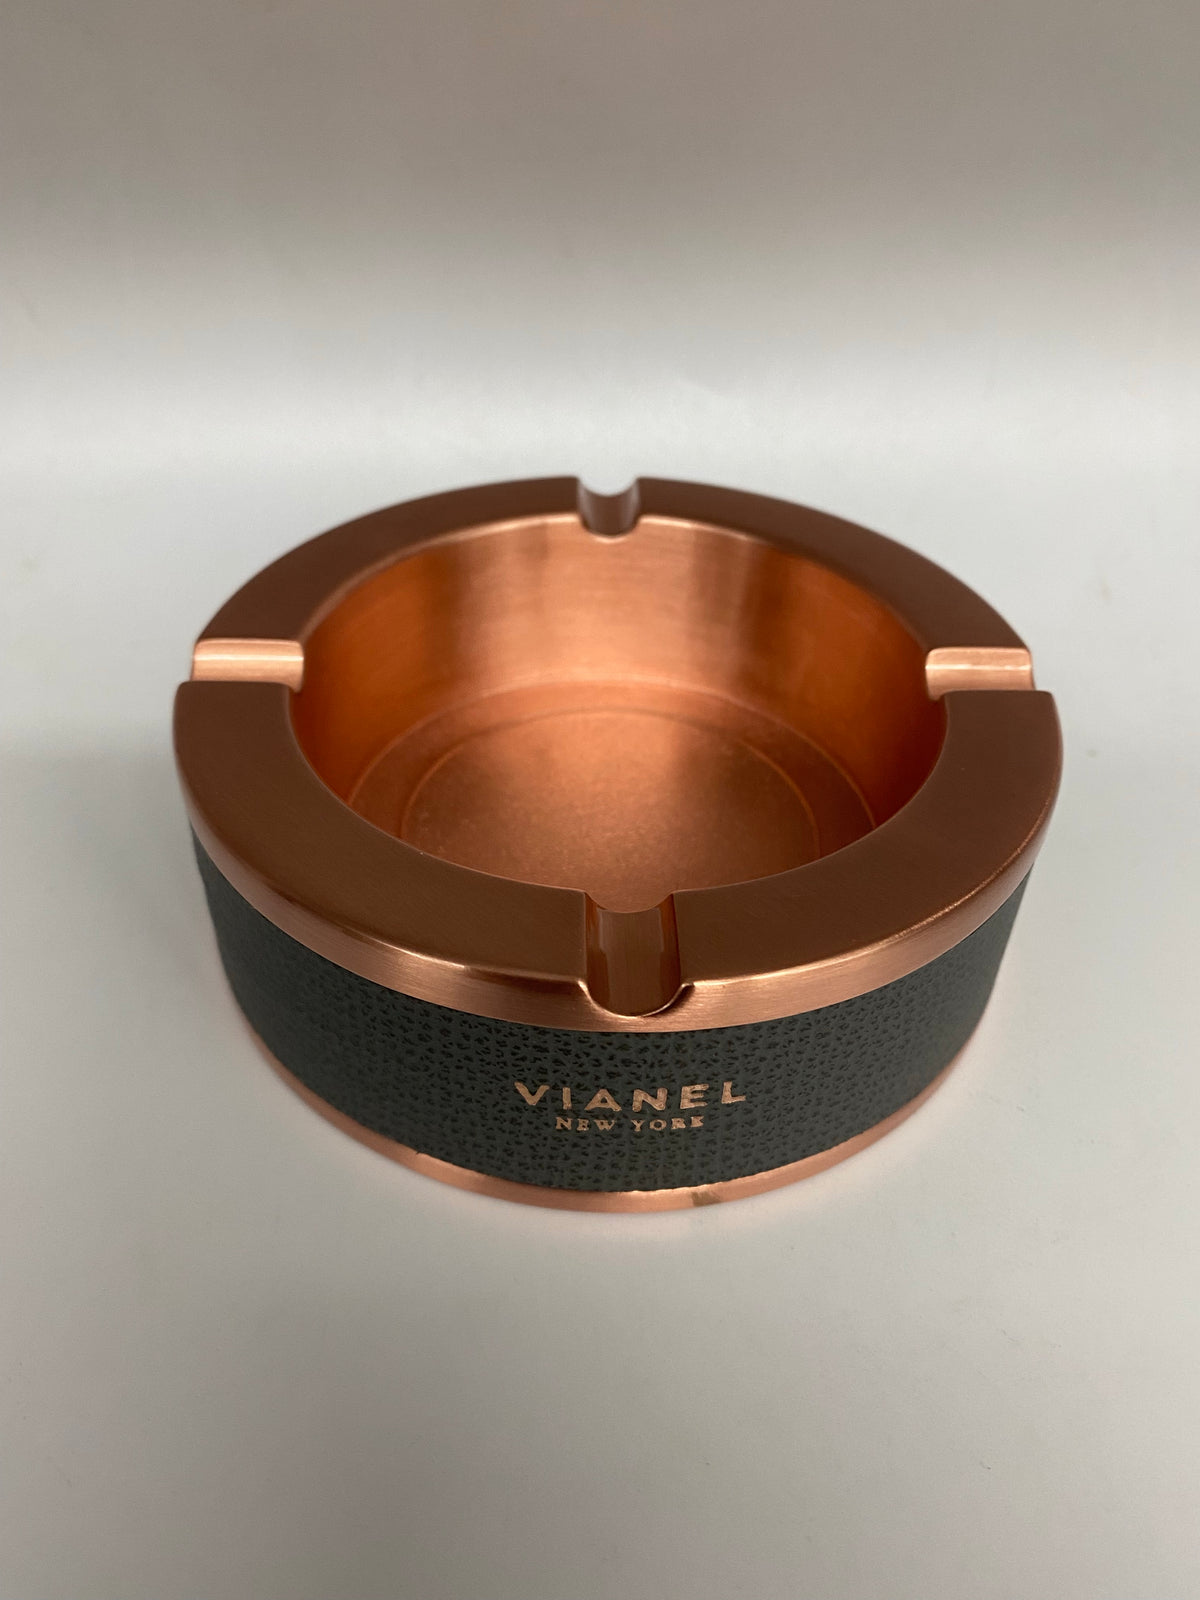 VIANEL ROSE GOLD COLORED ASHTRAY W/ GREY CALFSKIN WRAP *** CLOSEOUT***